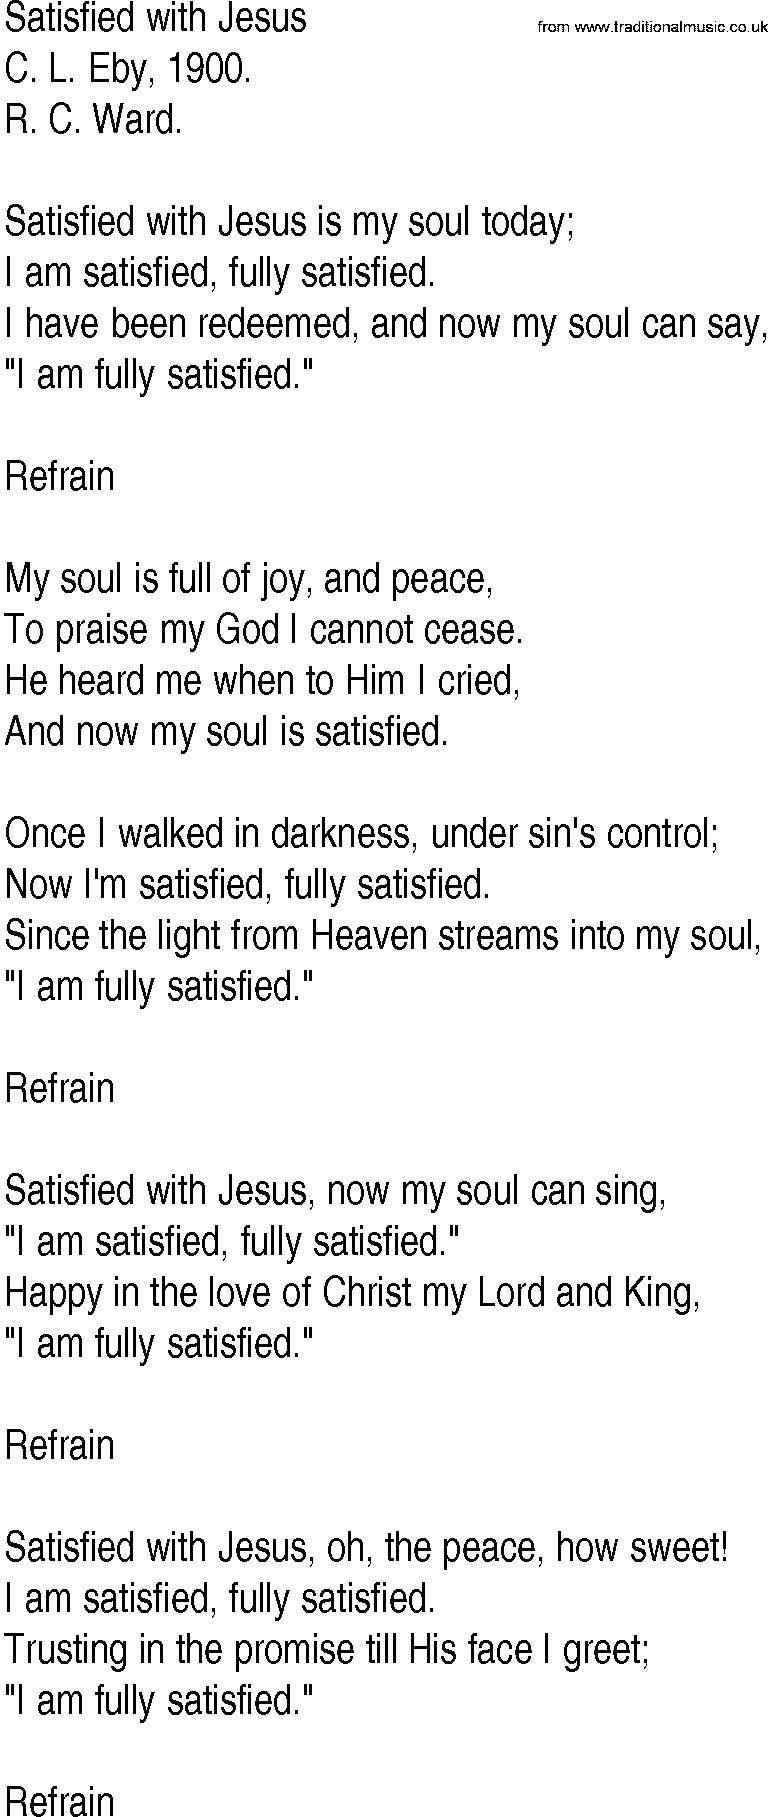 Hymn and Gospel Song: Satisfied with Jesus by C L Eby lyrics